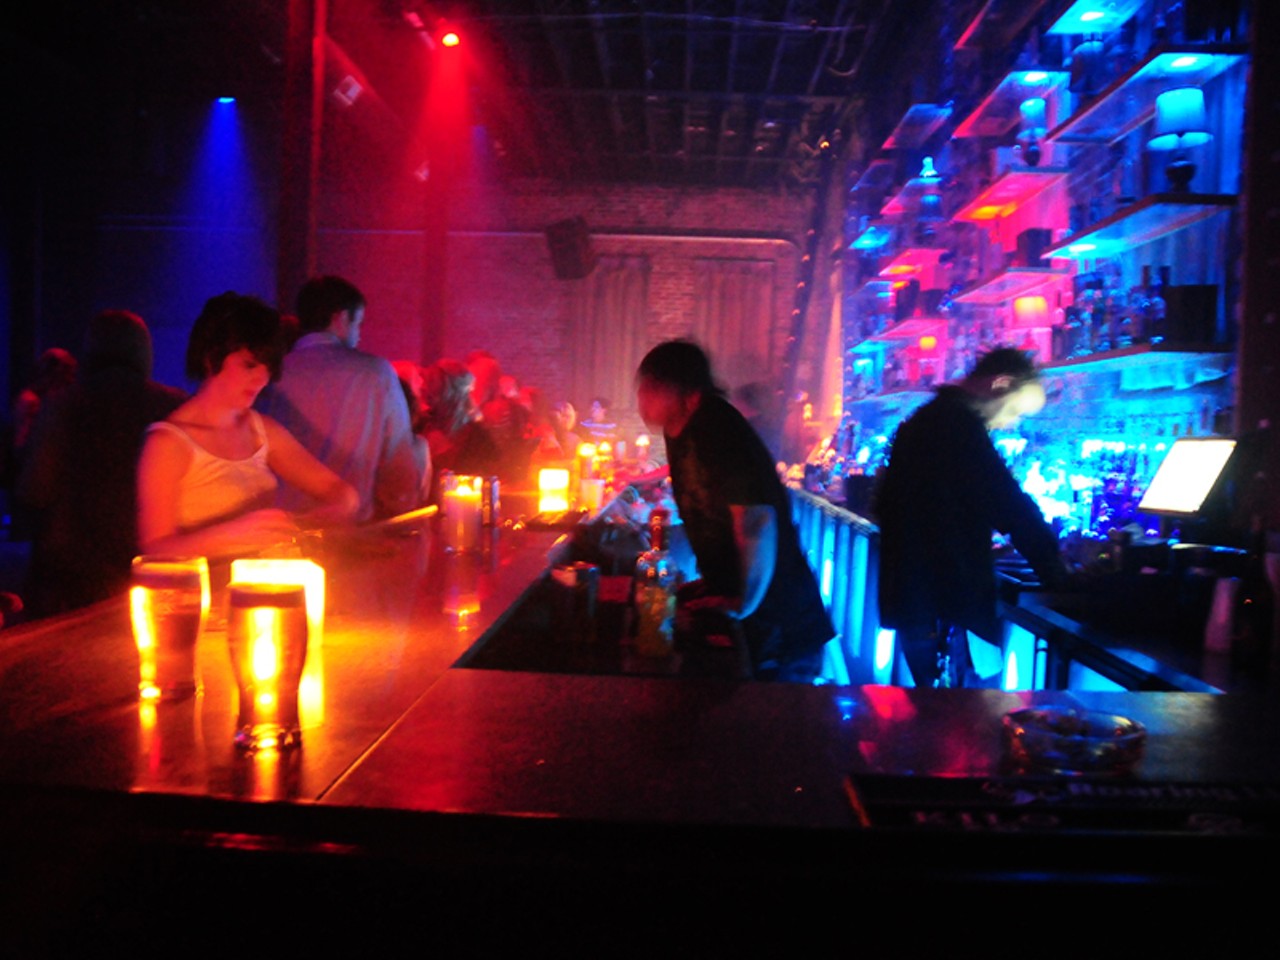 Michael Reiss, Sol promoter, says he aims to make Sol Lounge the destination for electronic music in St. Louis.